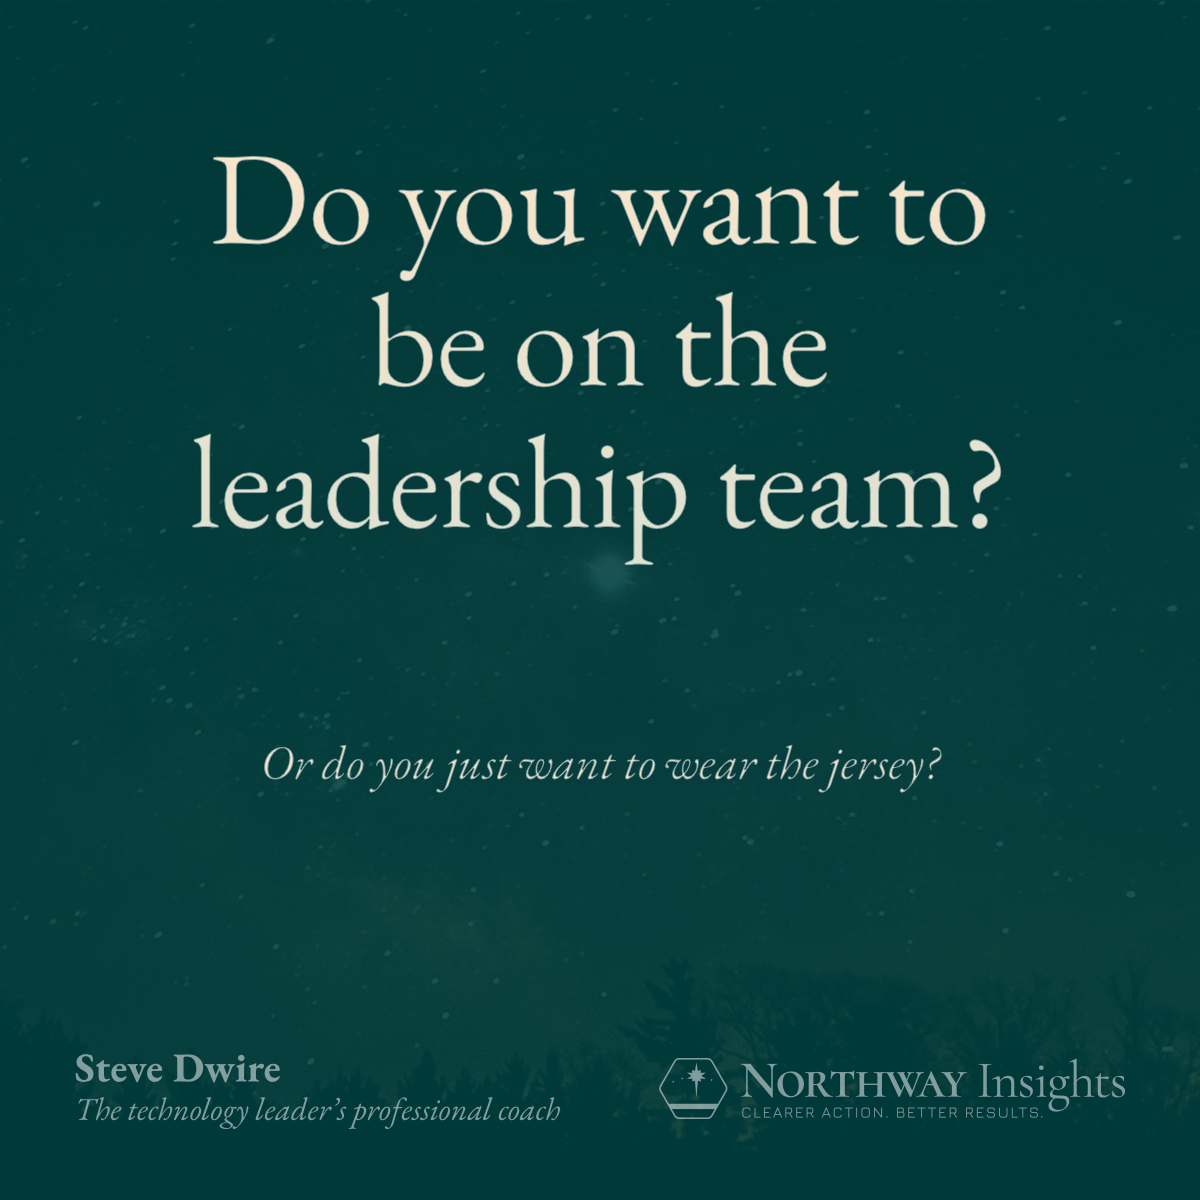 Do you want to be on the leadership team? (Or do you just want to wear the jersey?)